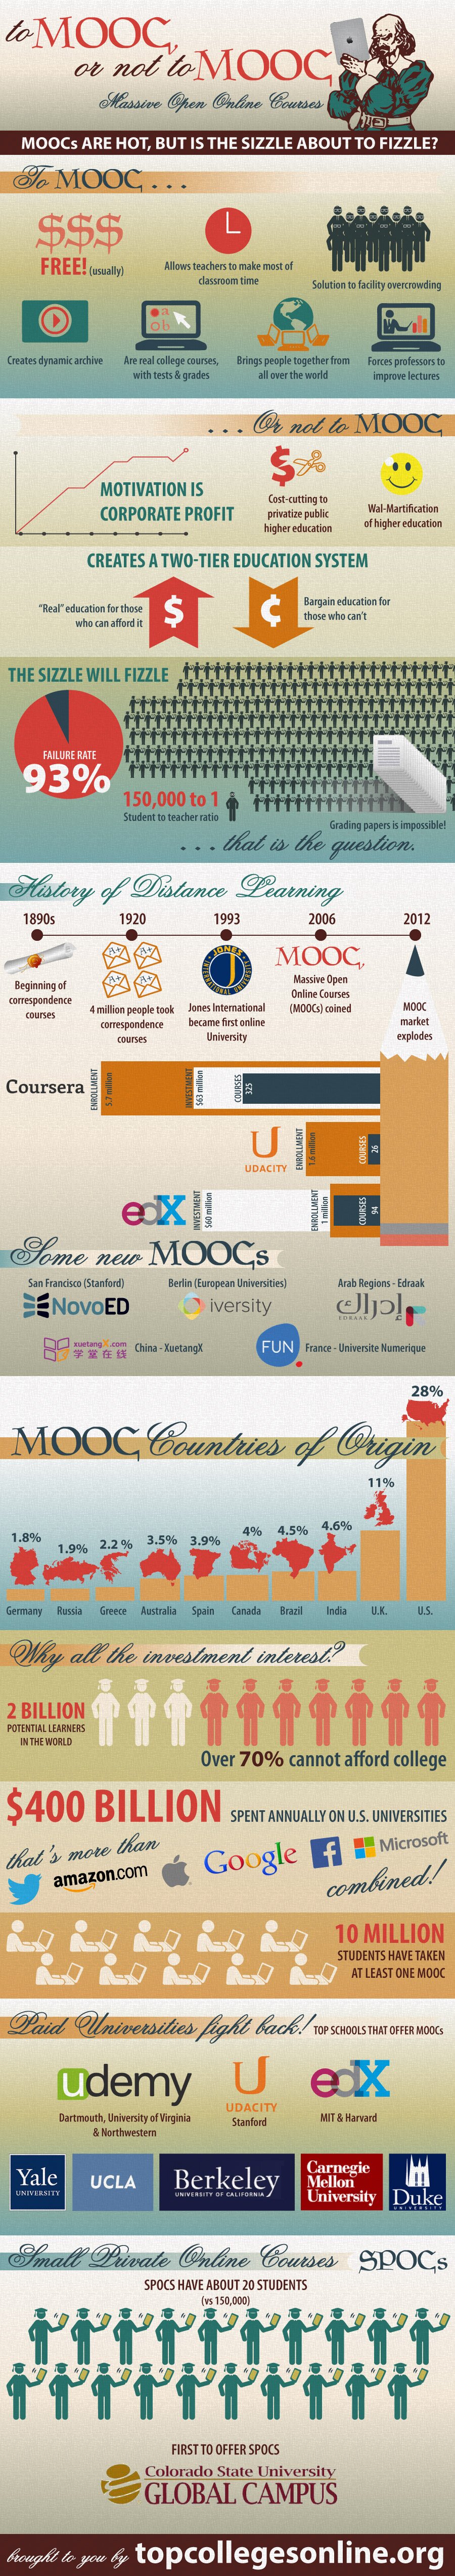 To-MOOC-or-not